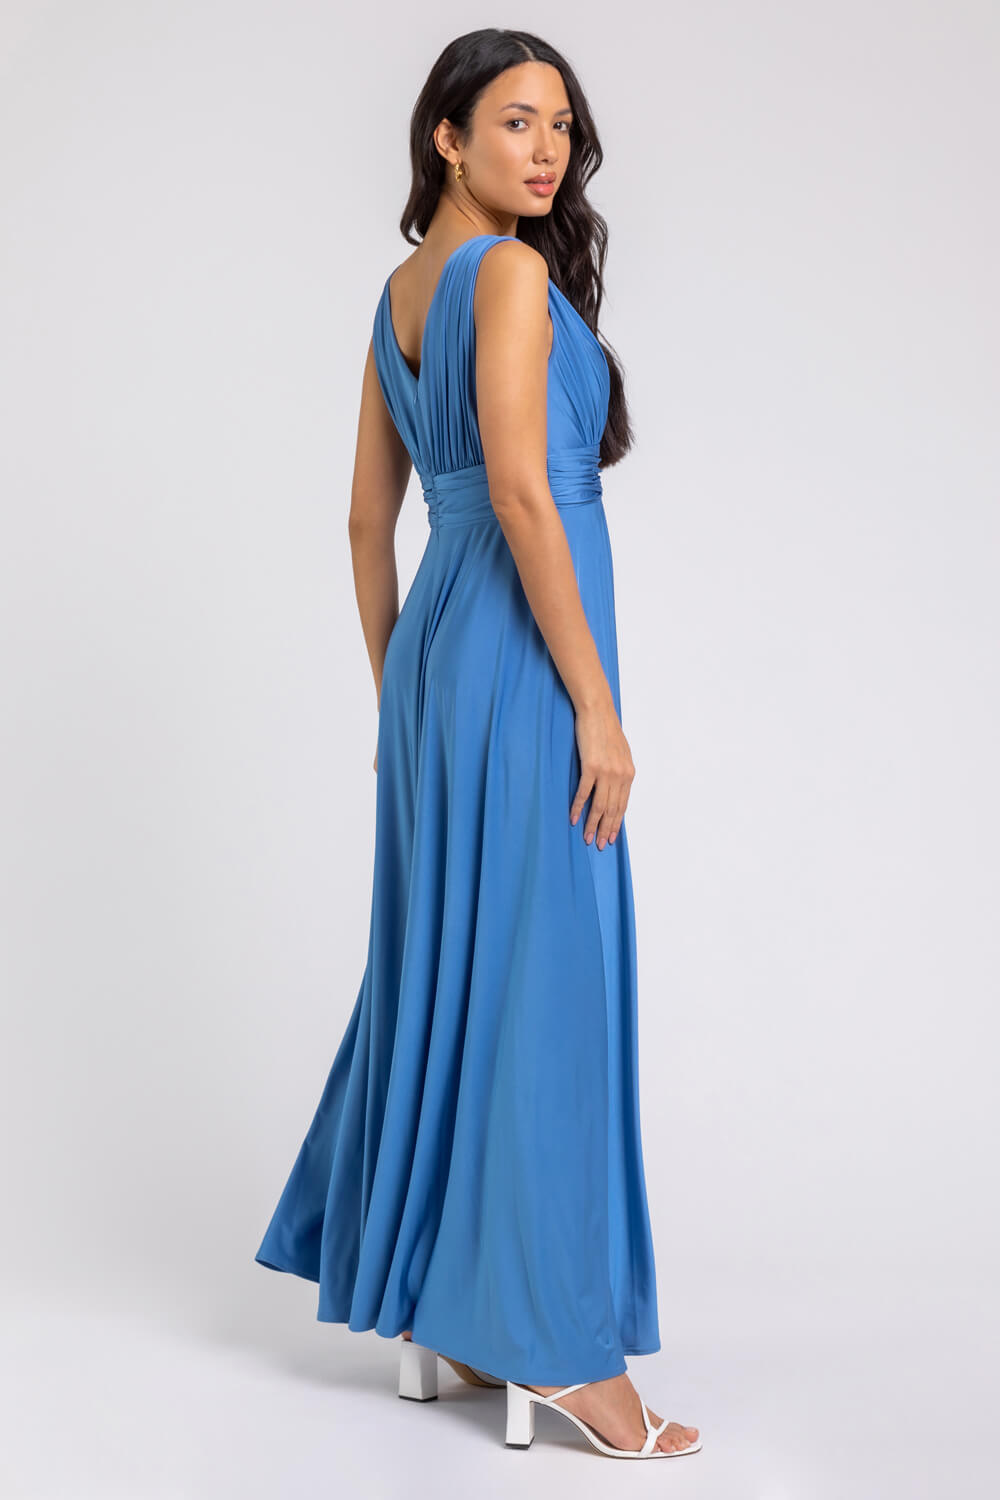 Blue Ruched Sleeveless Stretch Maxi Dress, Image 2 of 5